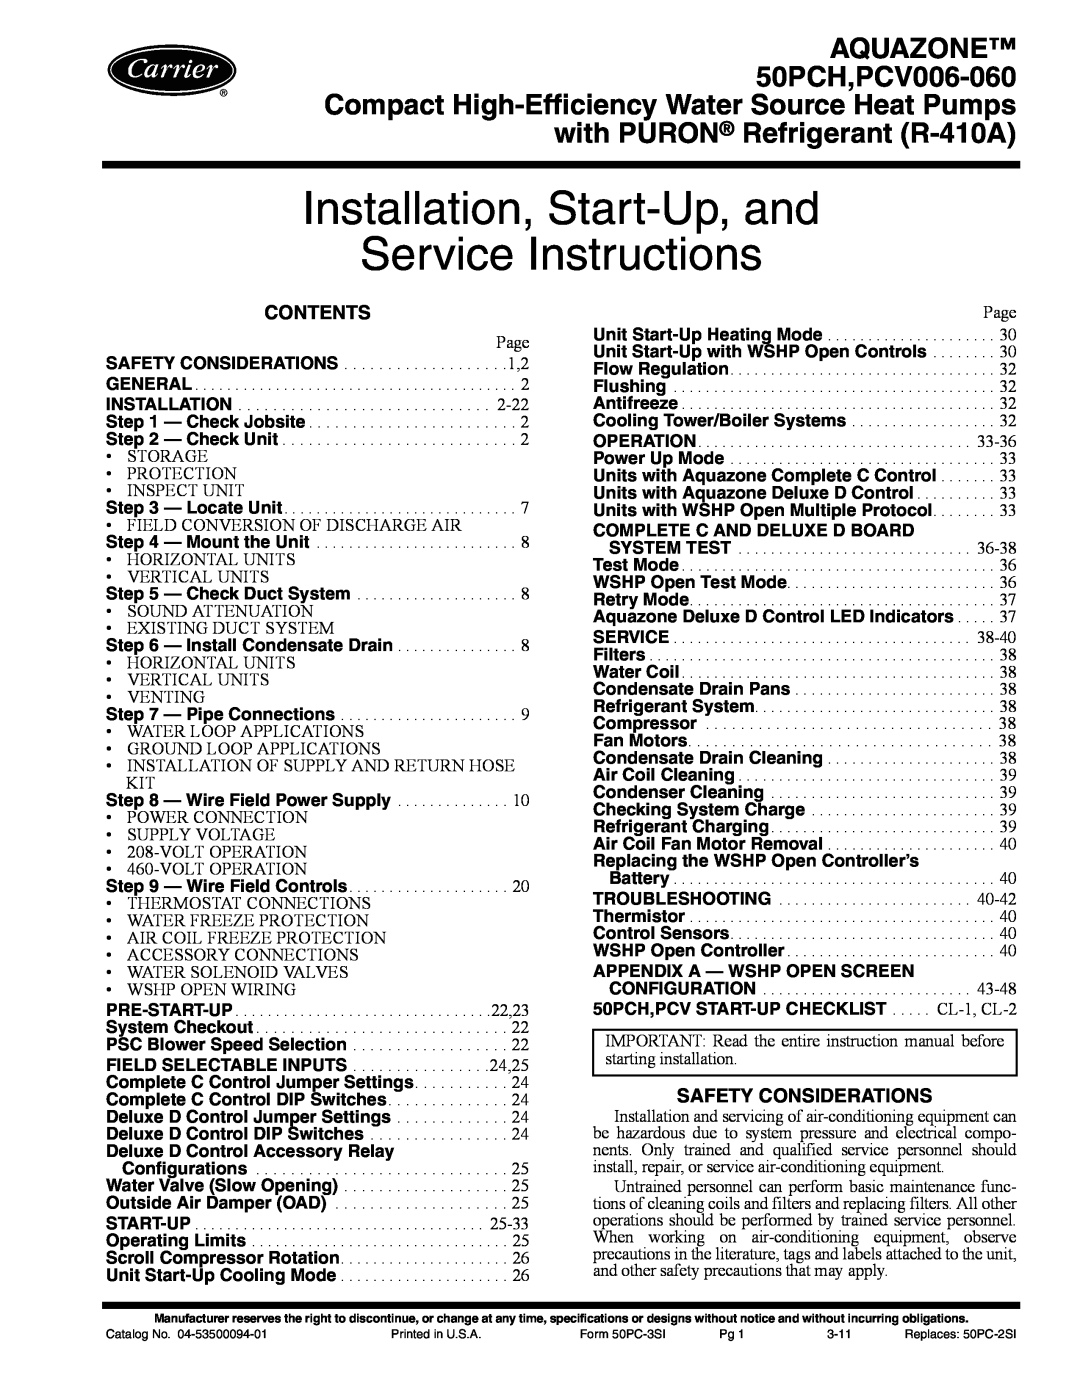 Carrier 50PCH specifications Contents, Safety Considerations, Installation, Start-Up,and Service Instructions 